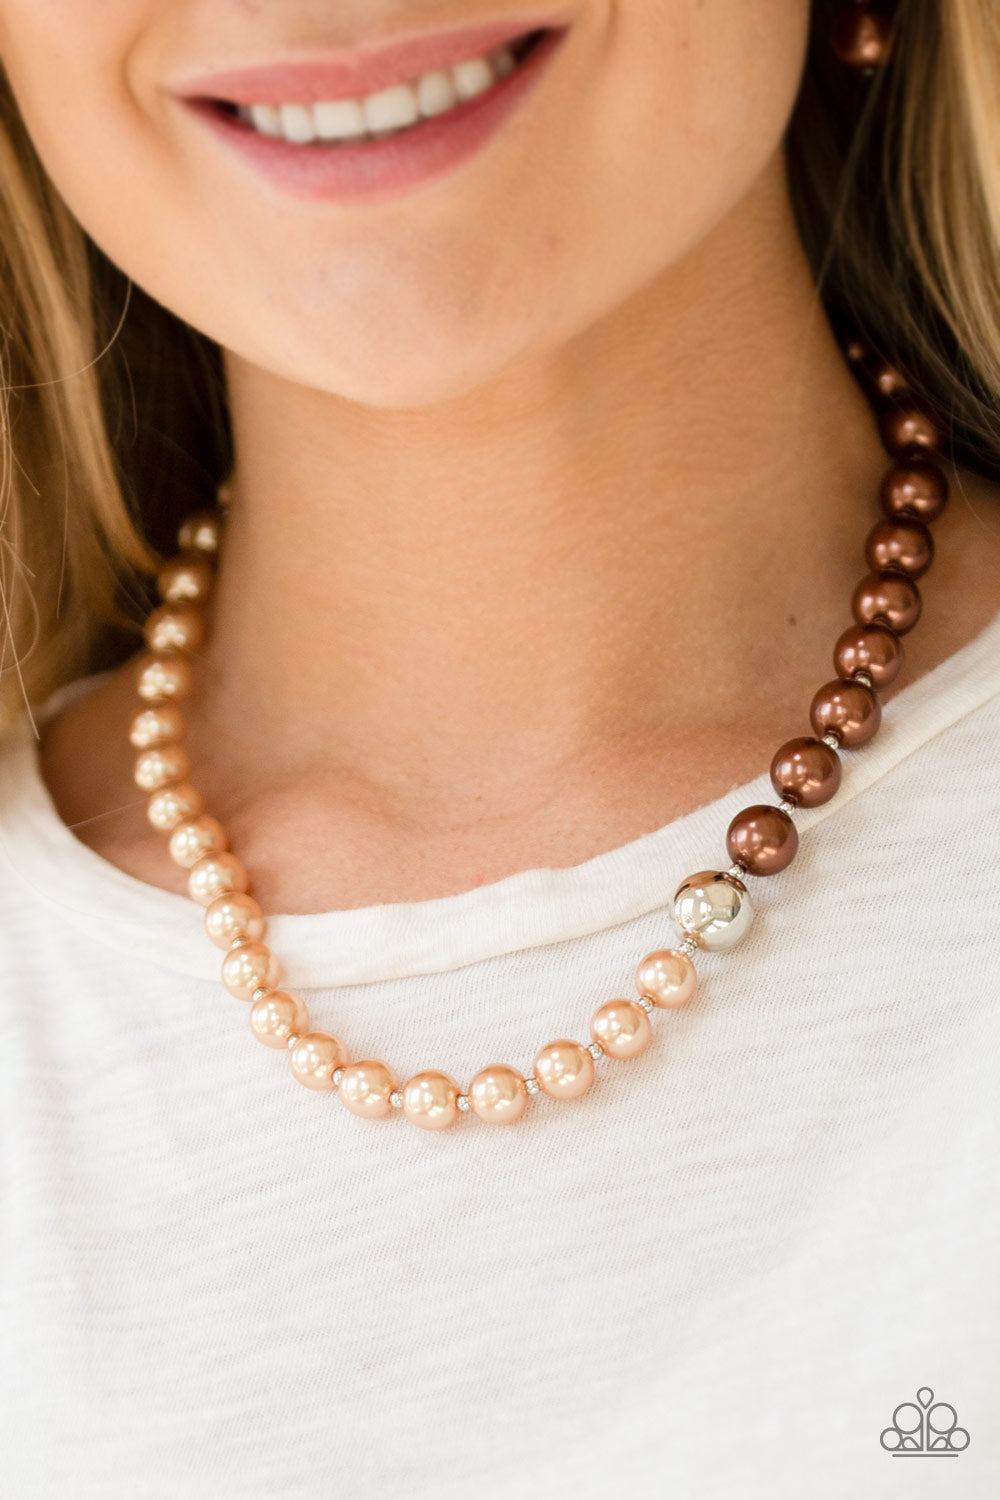 5TH AVENUE A-LISTER - BROWN GOLDEN SINGLE STRAND PEARLS NECKLACE